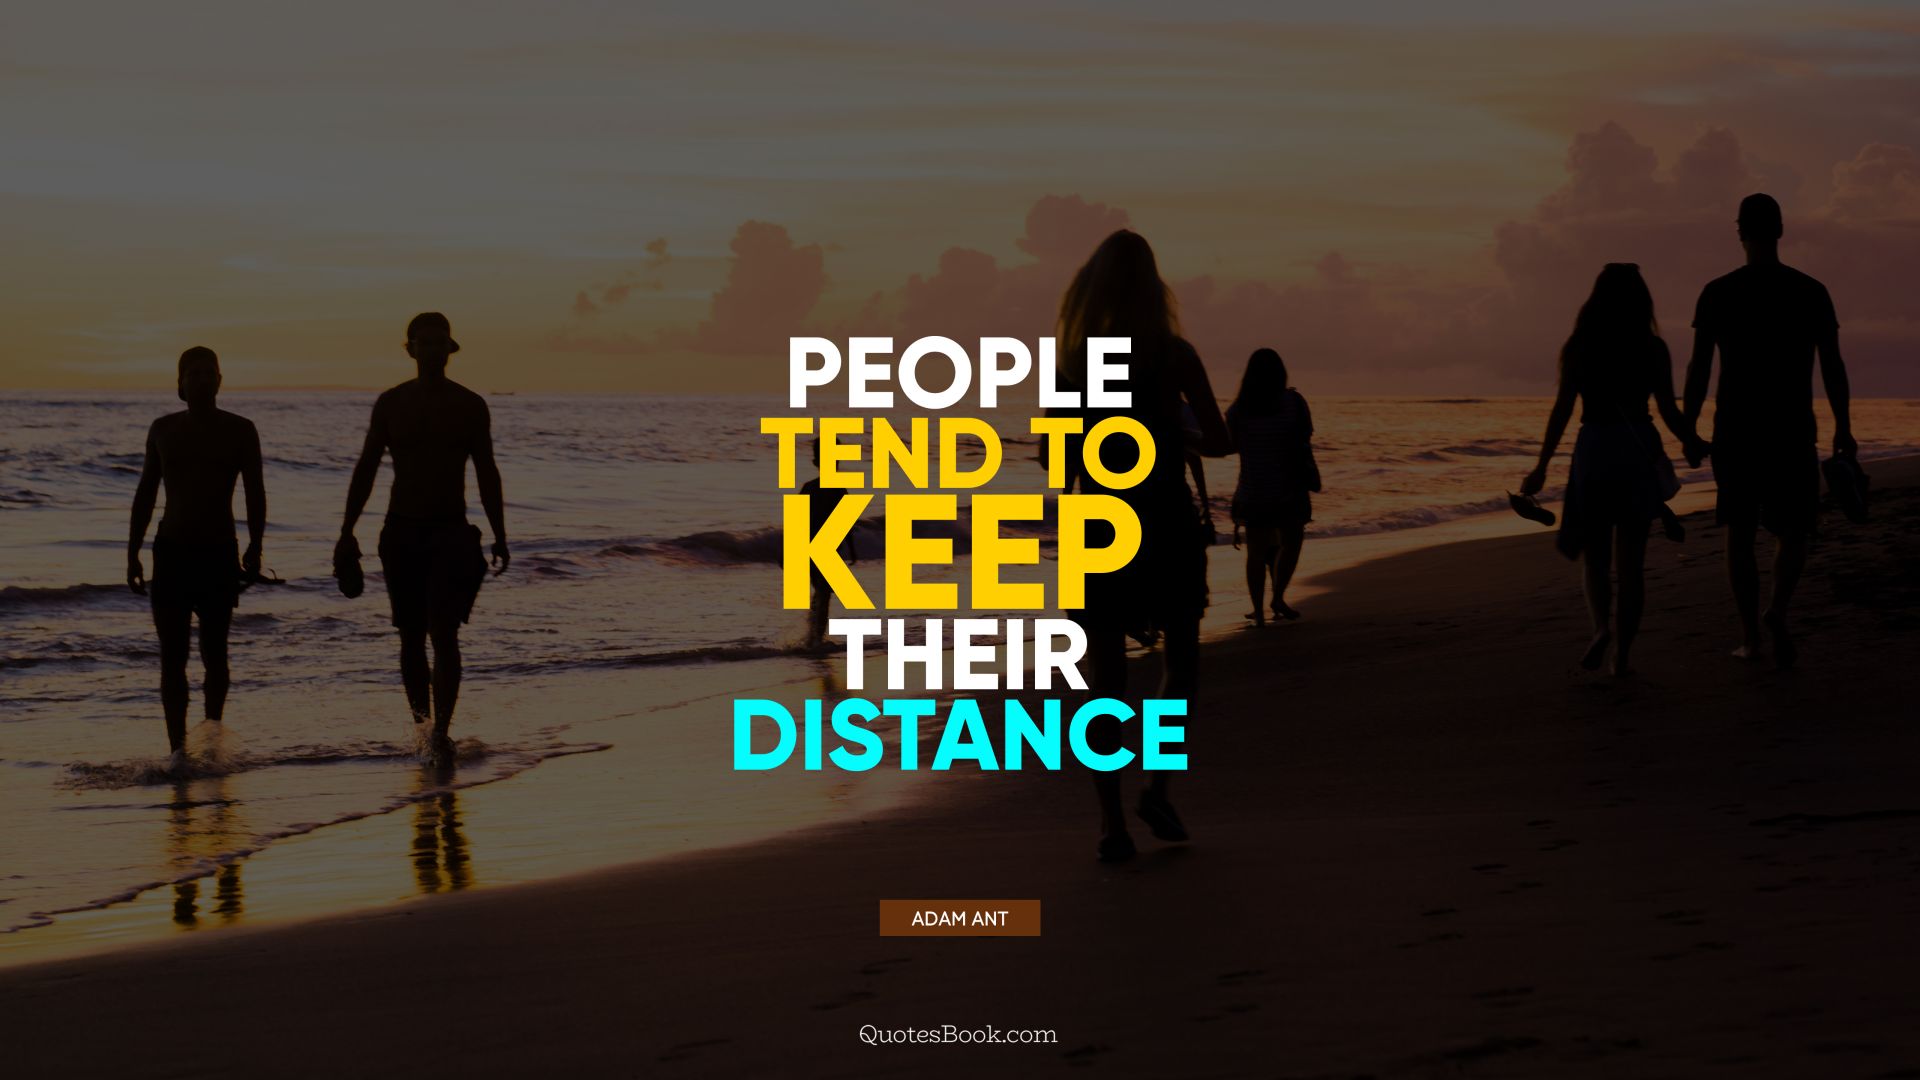 People tend to keep their distance. - Quote by Adam Ant